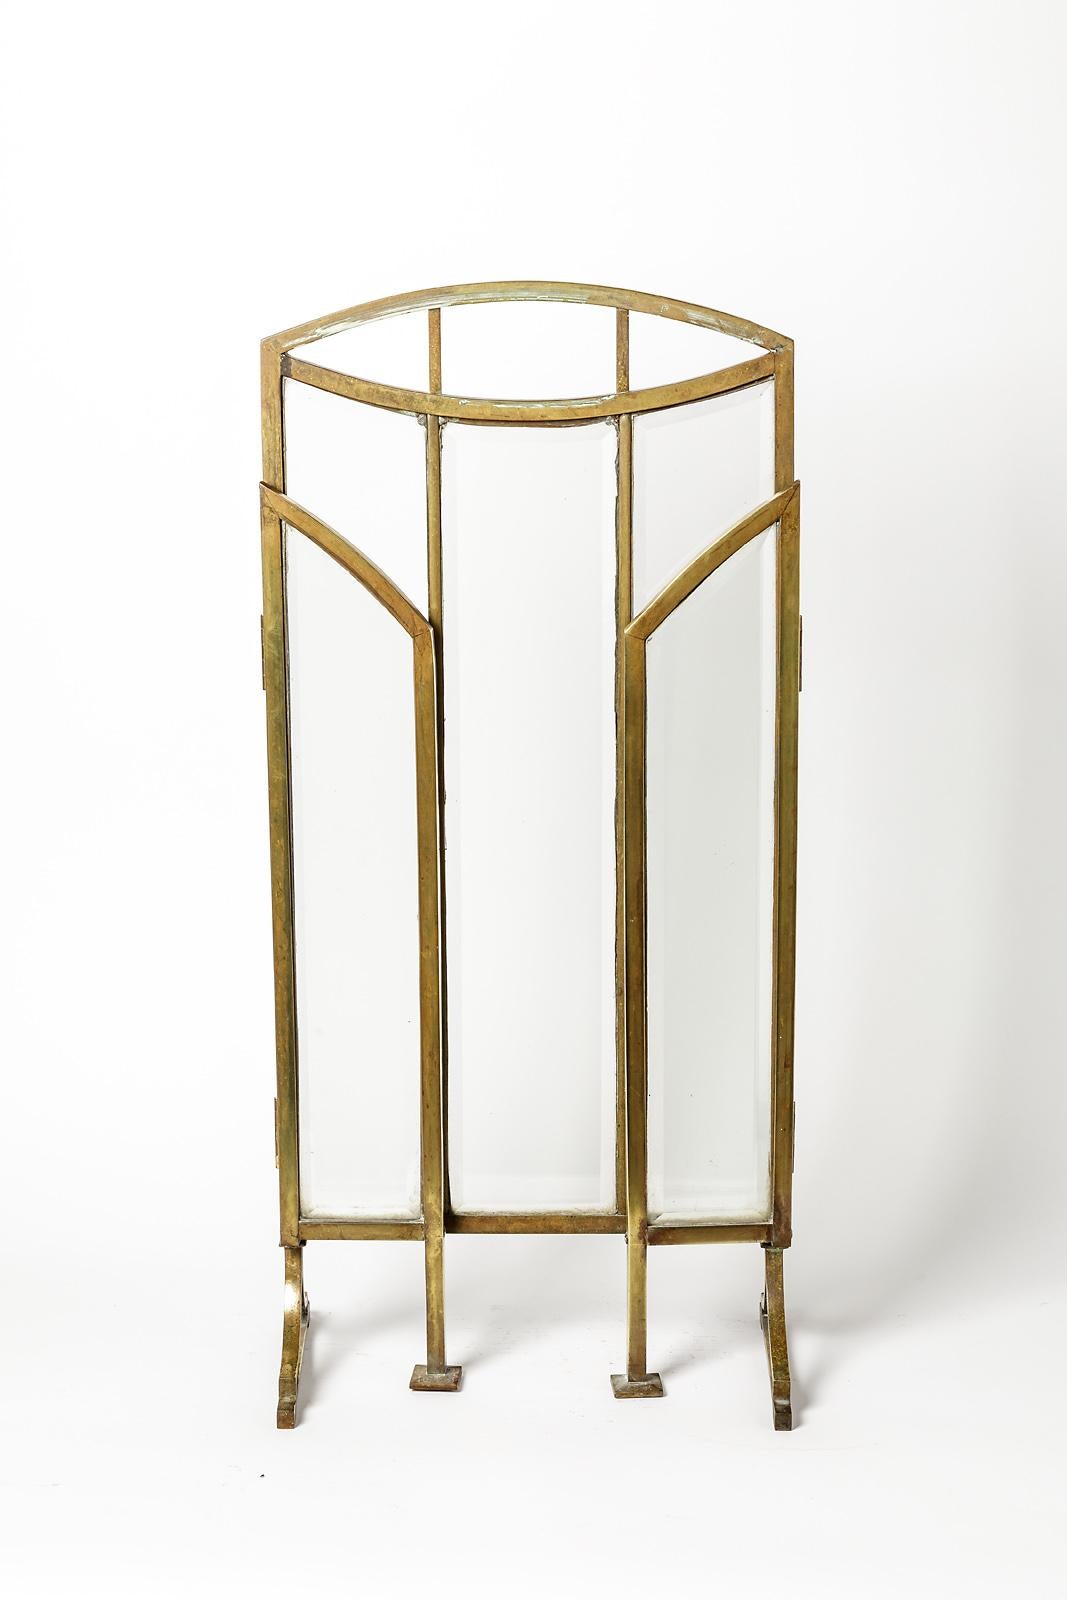 1900 French Art Deco Golden Brass and Glass Fire Screen for Fireplace 4